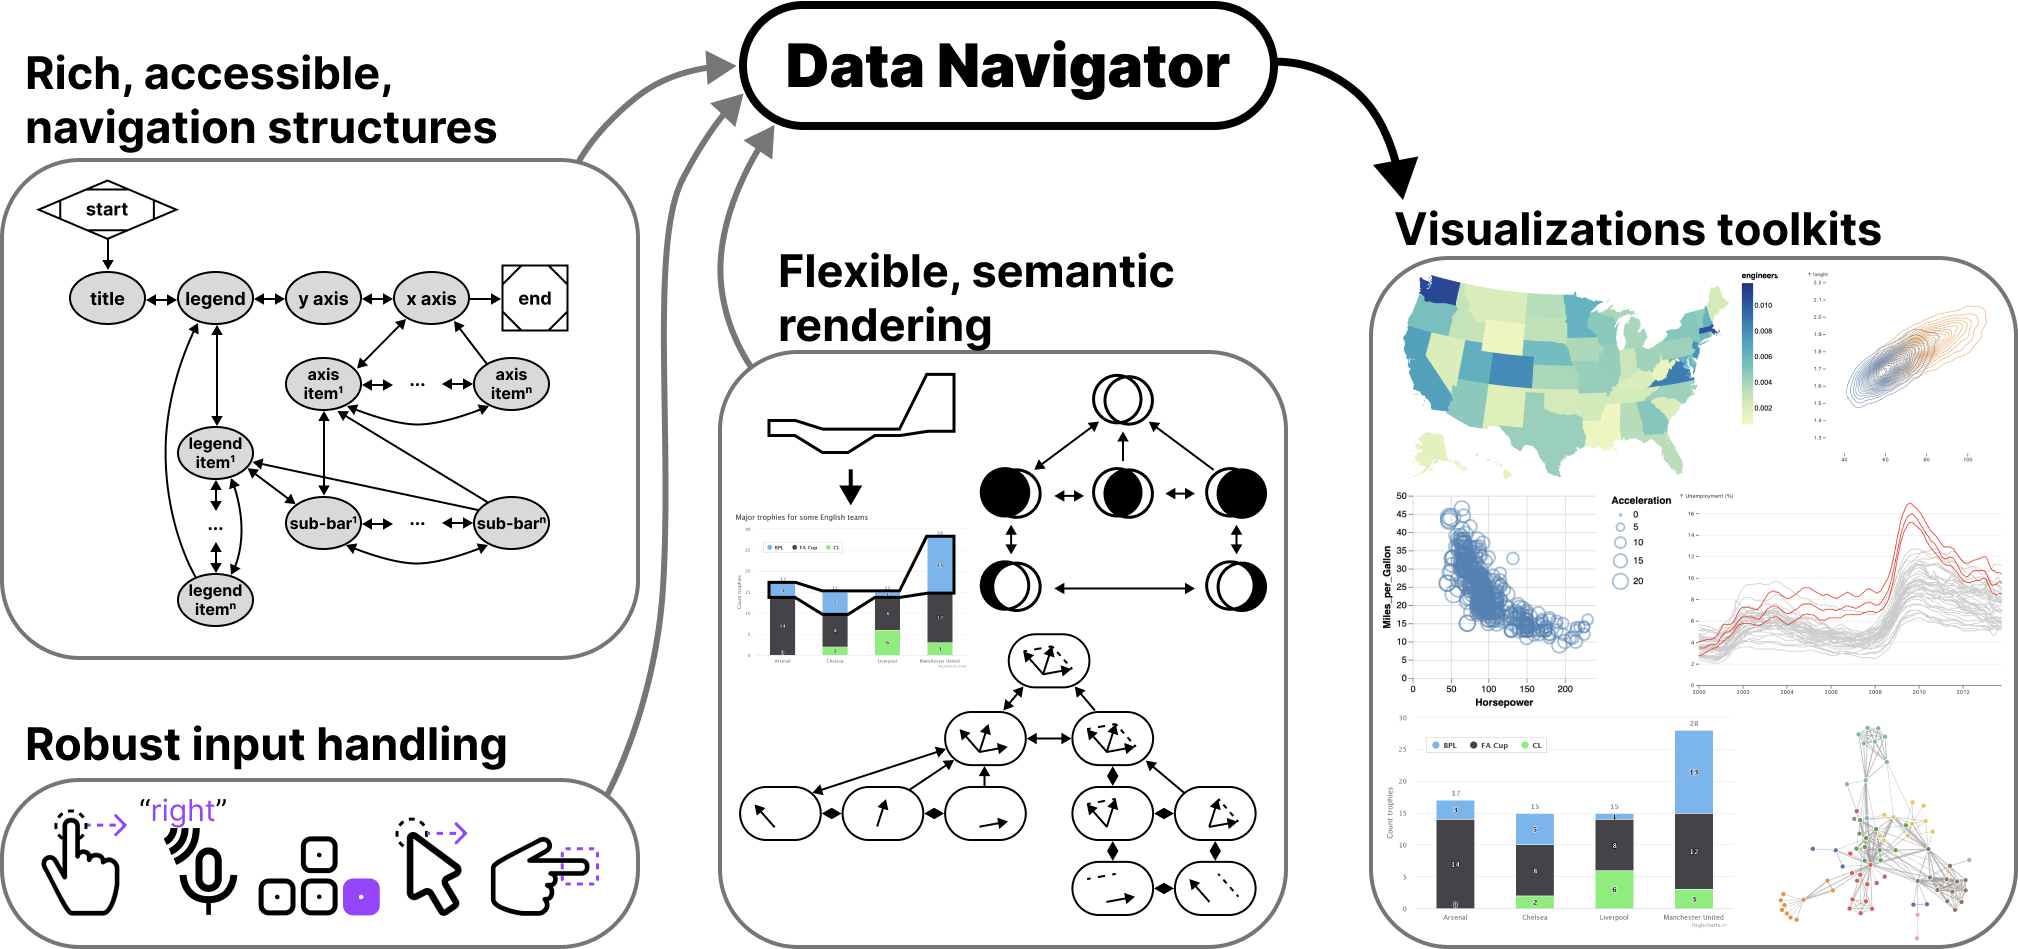 A diagram that shows an image of rich, accessible, navigation structures, icons for robust input handling, and additional graphics for flexible, semantic rendering. These images, icons, and graphics all feed into Data Navigator, which feeds into visualization toolkits, shown with a variety of different data visualization types (maps, scatterplots, lines, graphs, and bar charts).